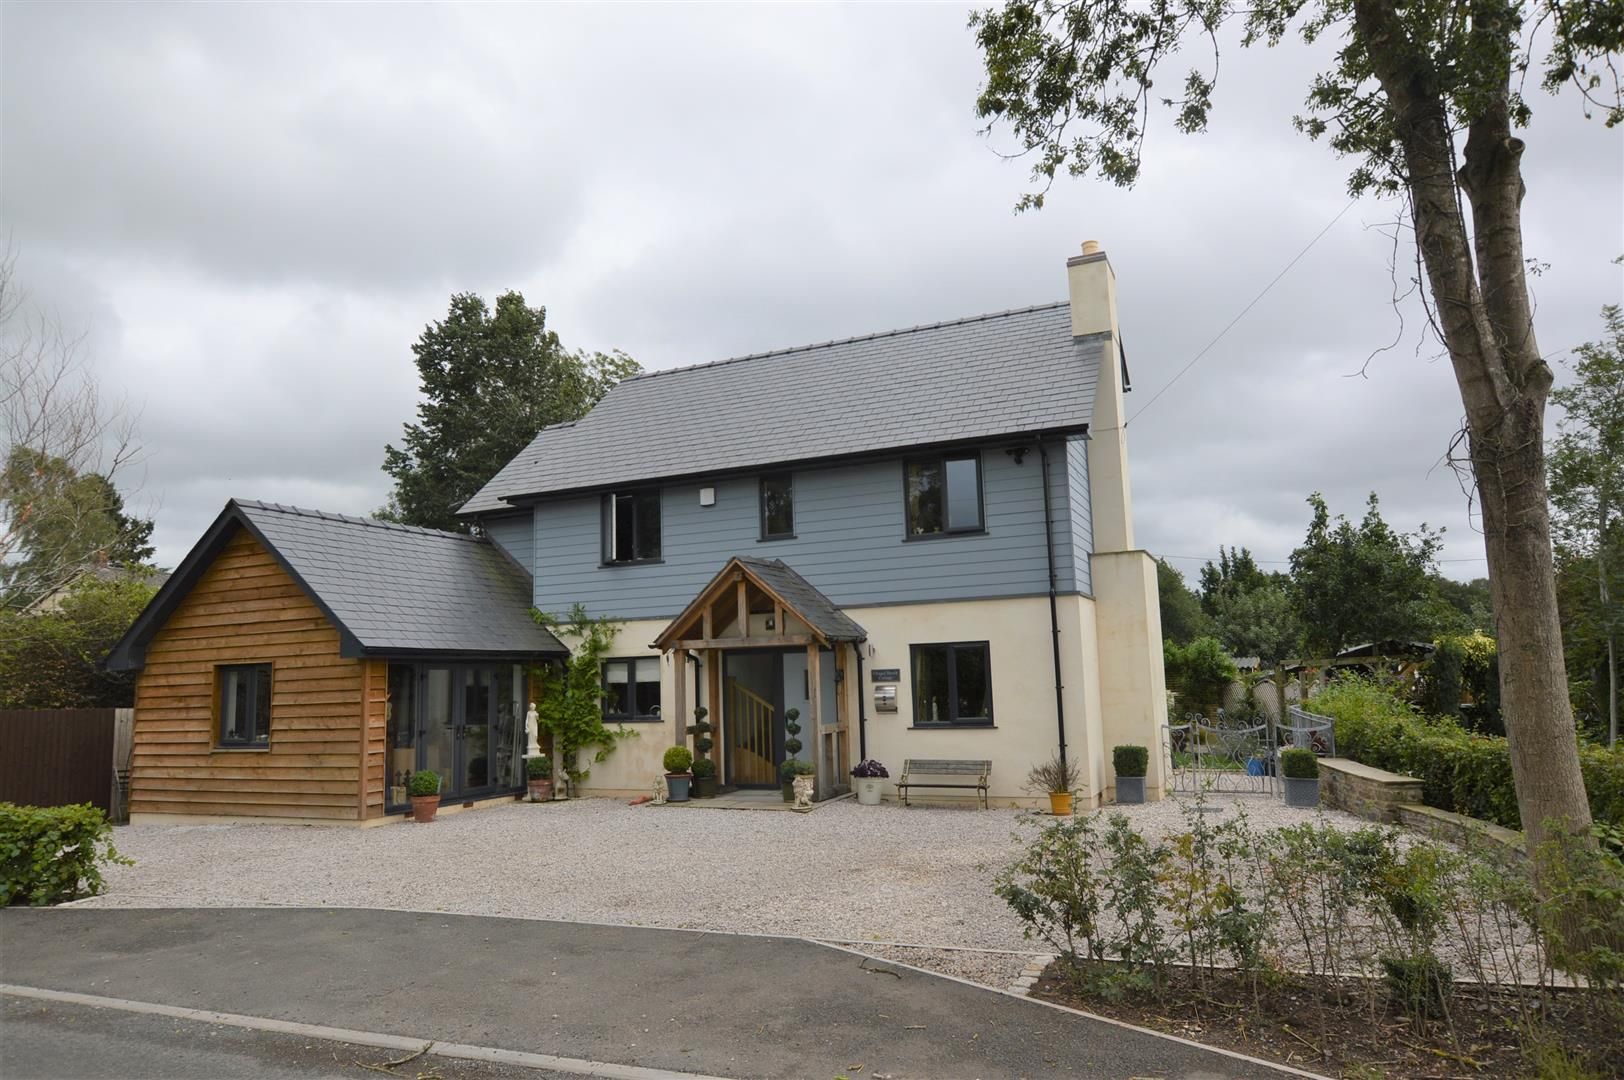 3 bed detached for sale in Kimbolton 1